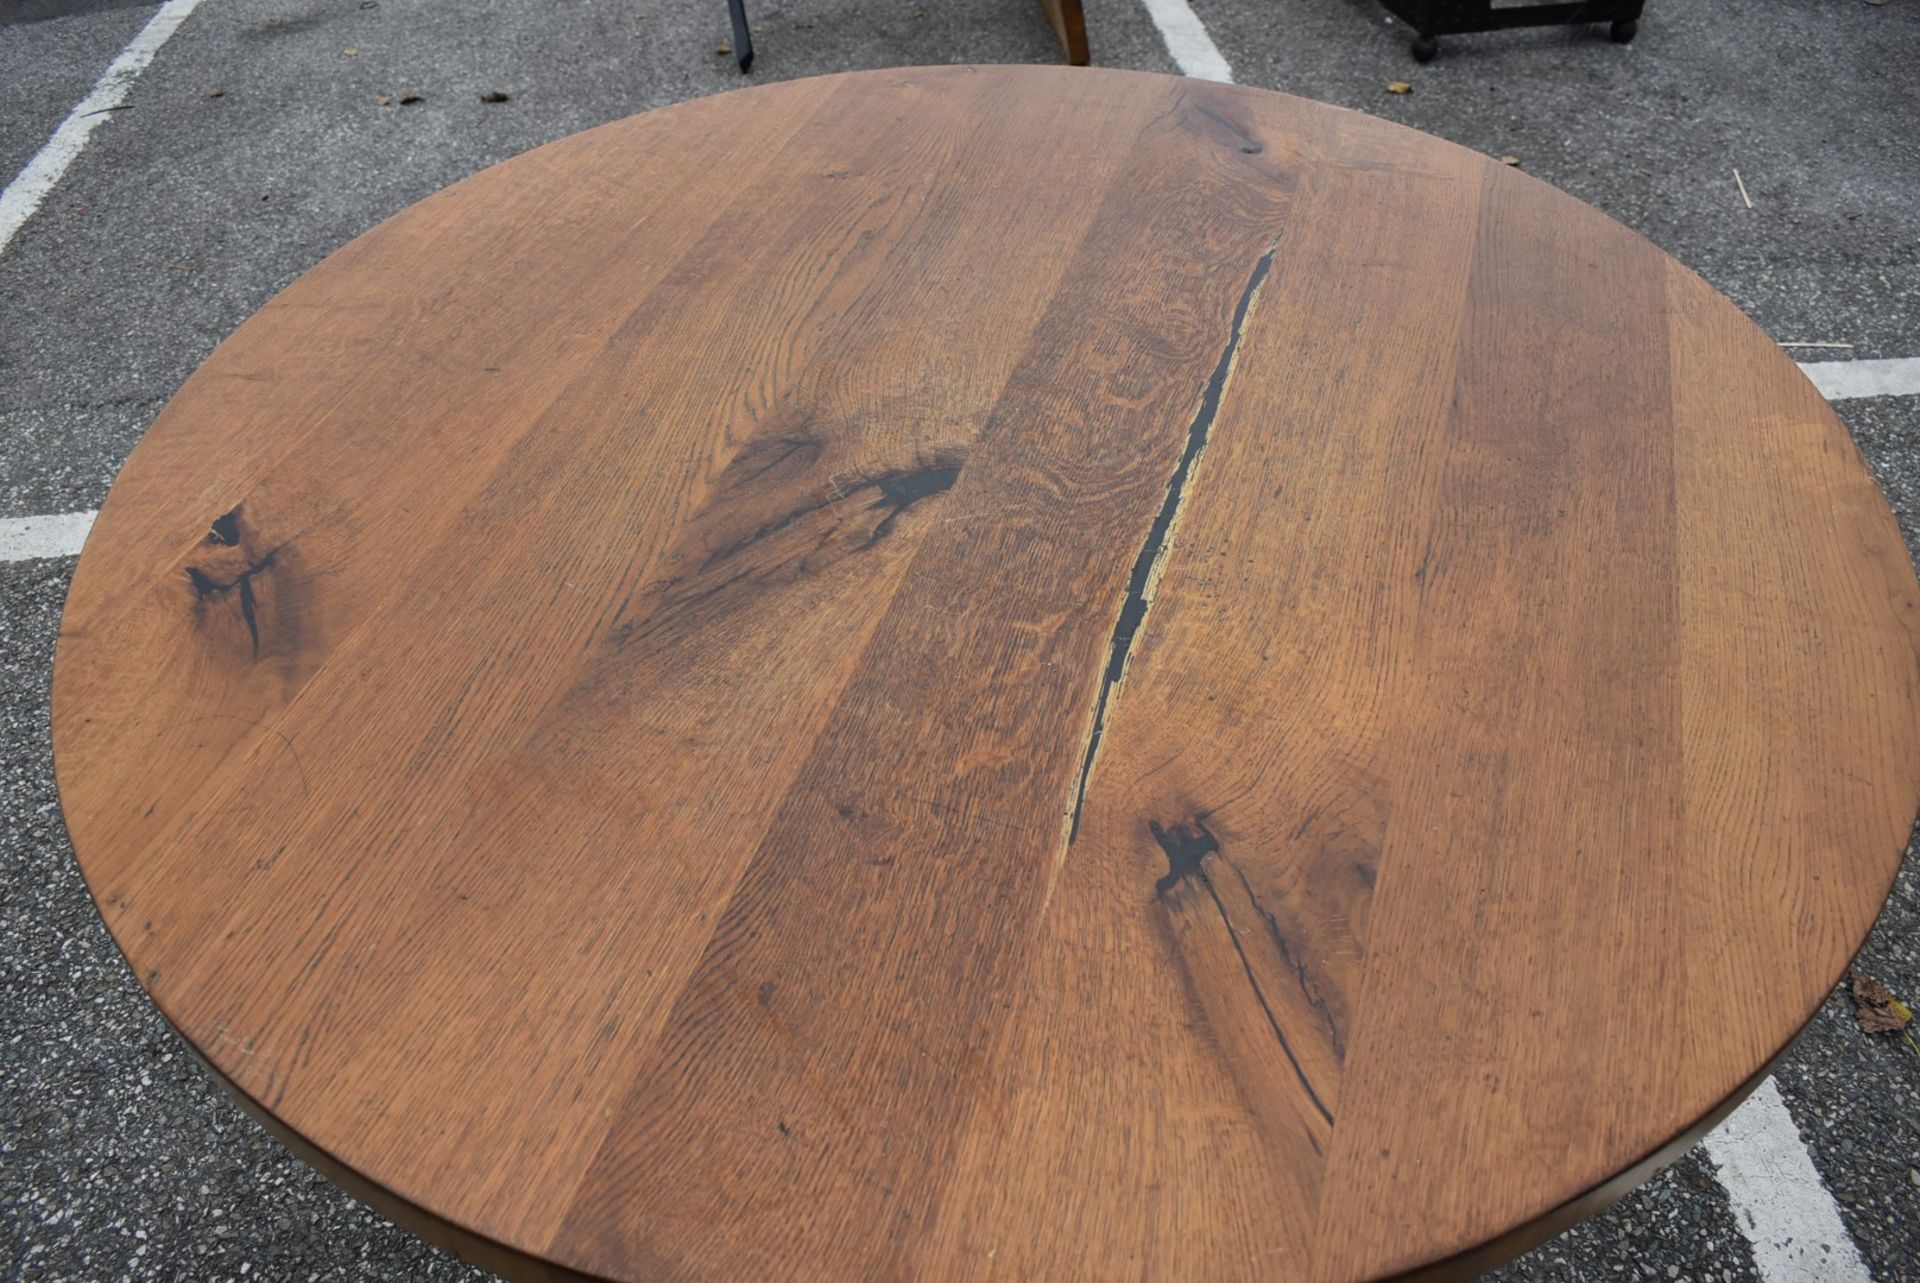 1 x Solid Oak 120cm Round Restaurant Table - Natural Rustic Knotty Oak Tops With Rustic Timber Base - Image 3 of 5